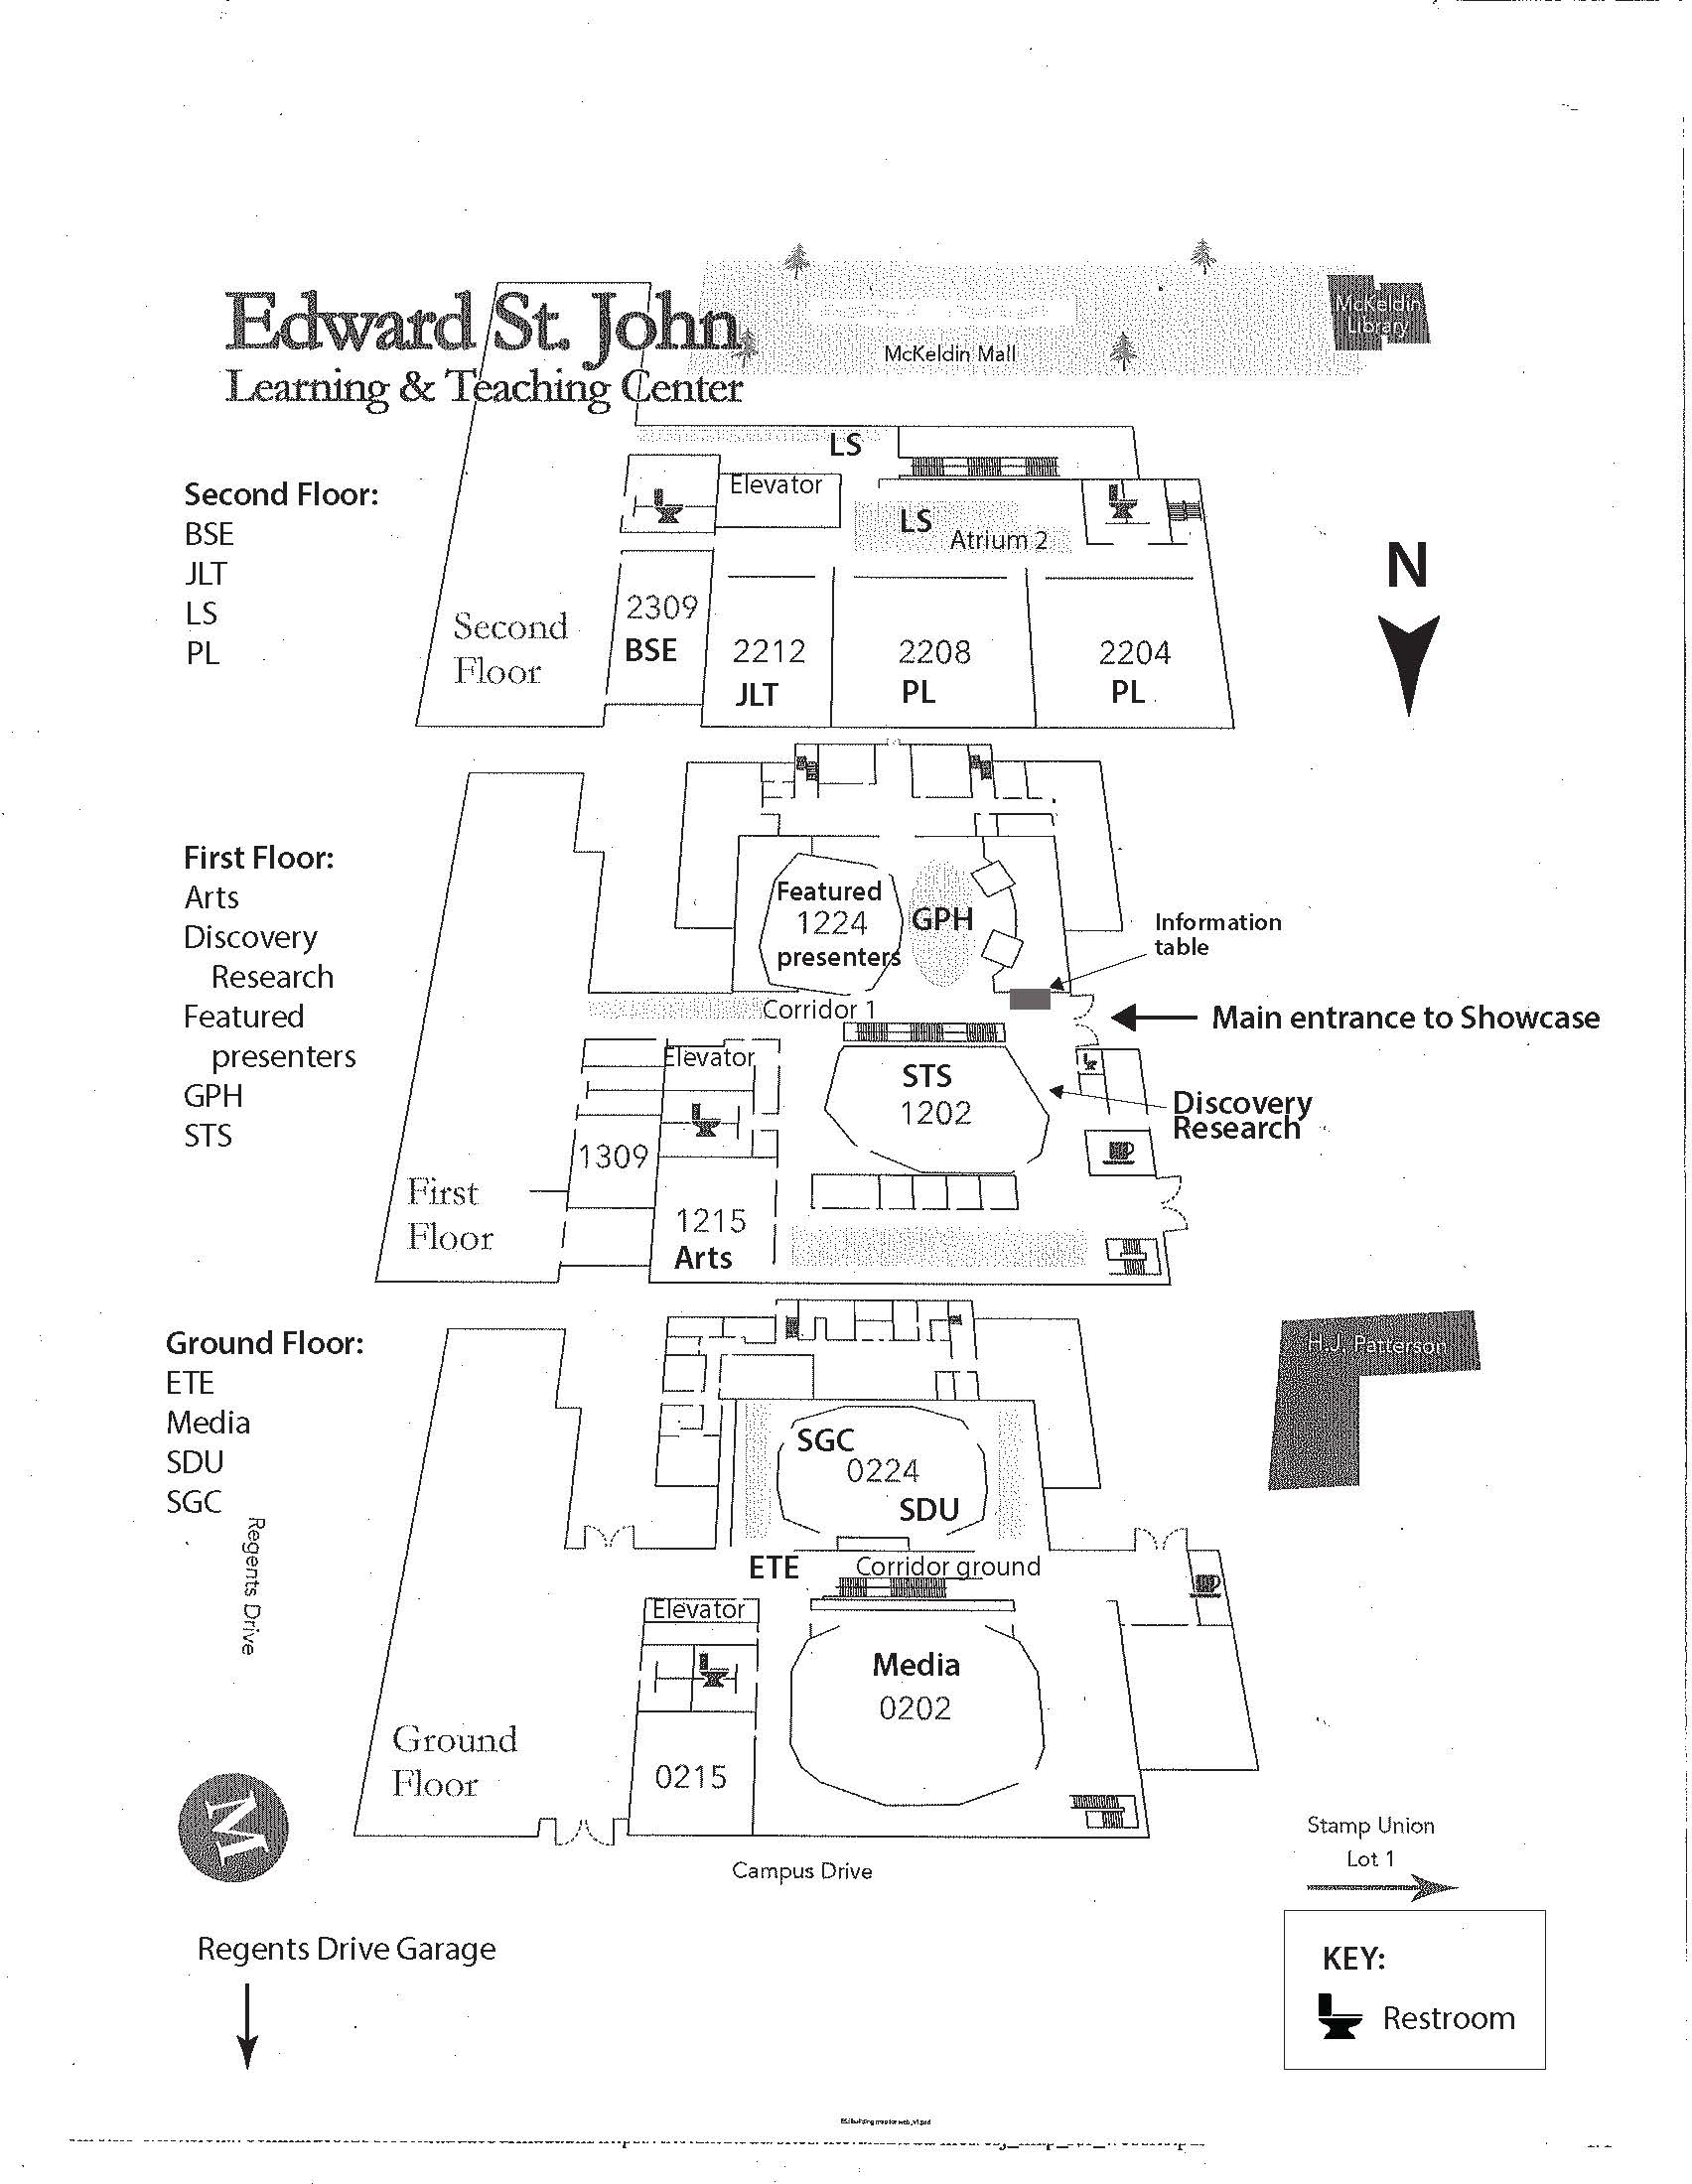 Map of three floors of Edward St. John, which Academic Showcase room assignments